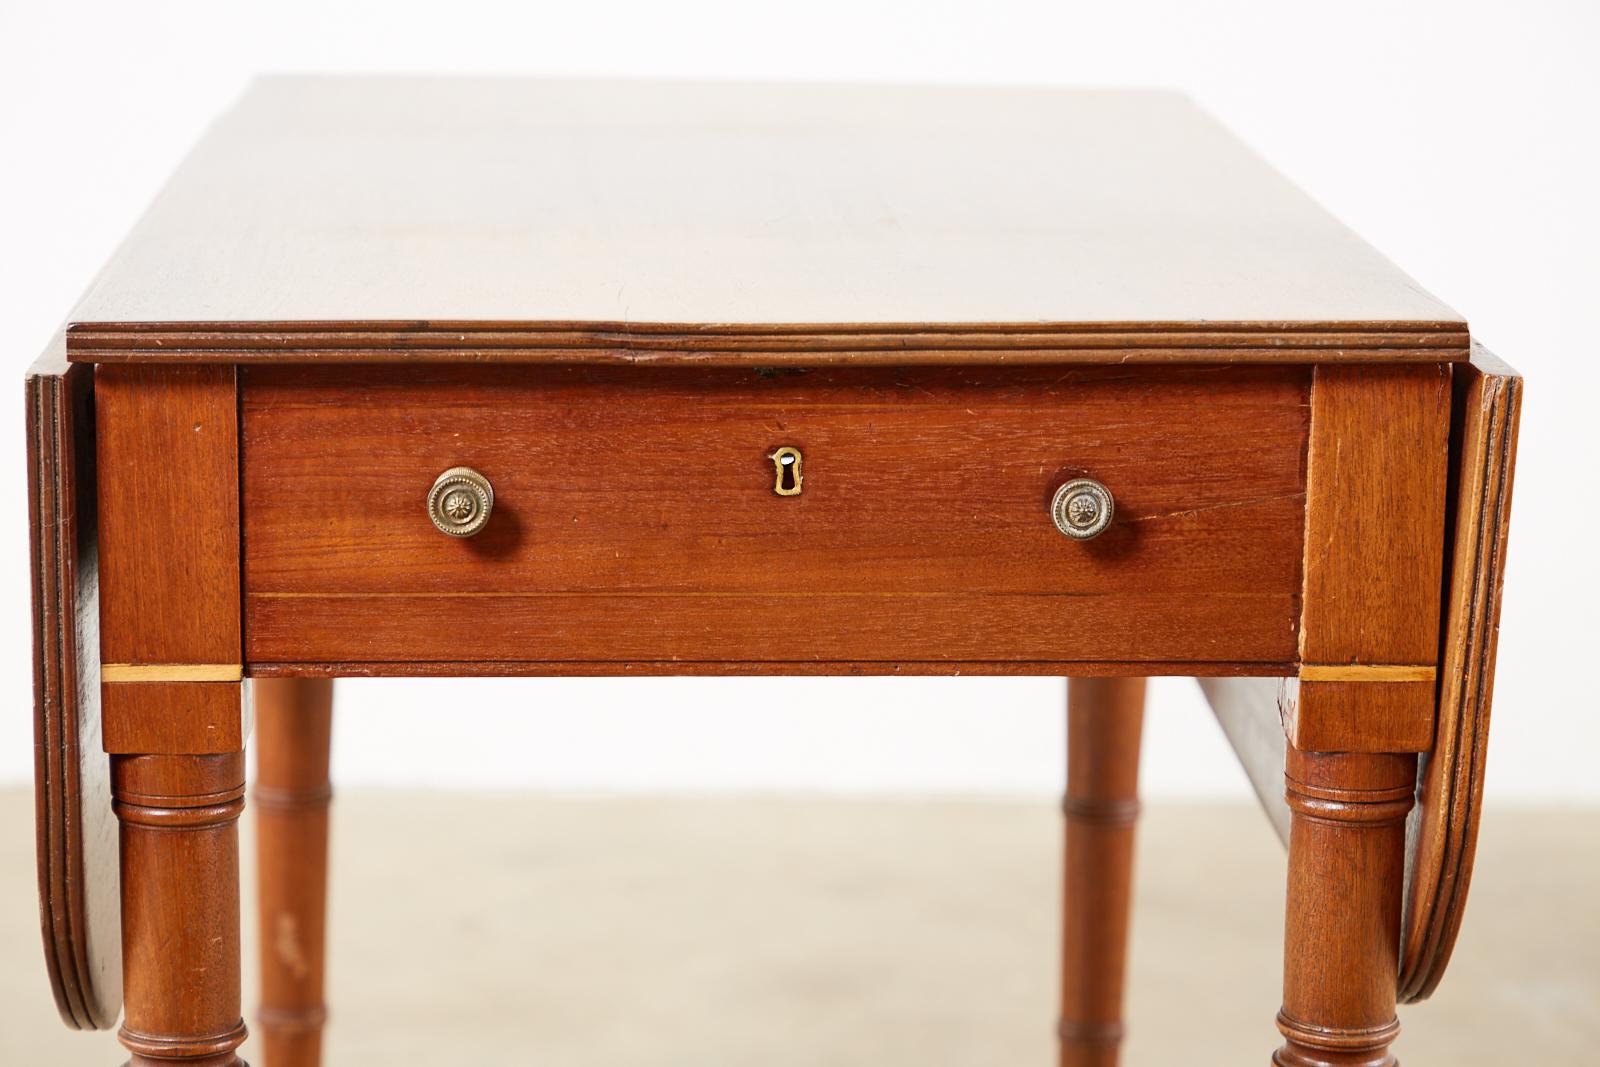 Hand-Crafted 19th Century Regency Pembroke Drop-Leaf Table For Sale